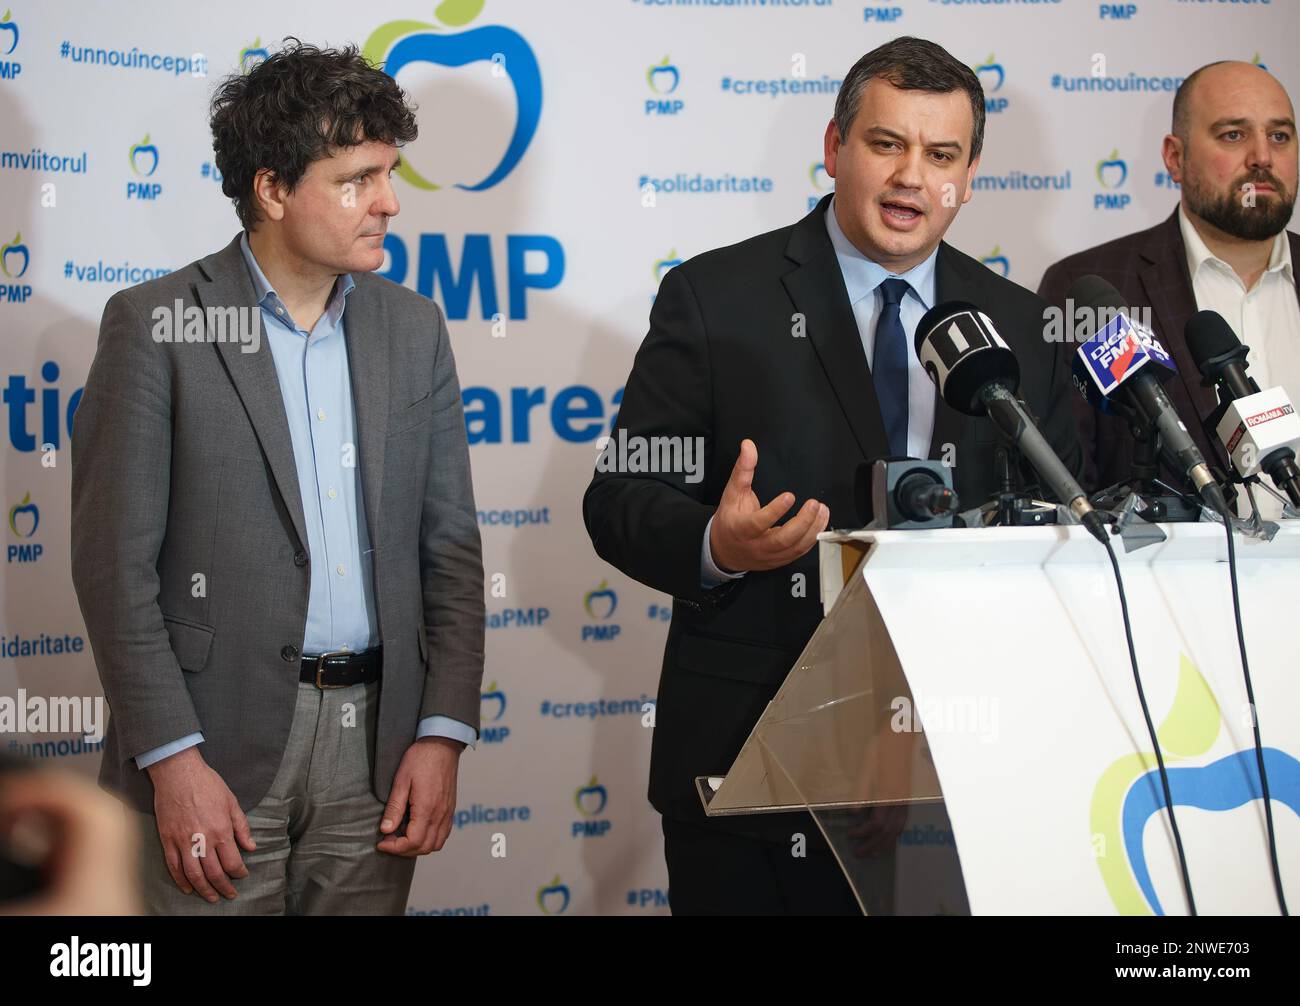 Bucharest, Romania. 28th Feb, 2023: Nicușor Dan (L), the general mayor of Bucharest, listens to the speech of the president of the Popular Movement Party, MEP Daniel Tomac (C), who let it be understood that he will support Dan in the next electoral campaign in 2024, during a press conference after their first meeting politics. Credit: Lucian Alecu/Alamy Live News Stock Photo